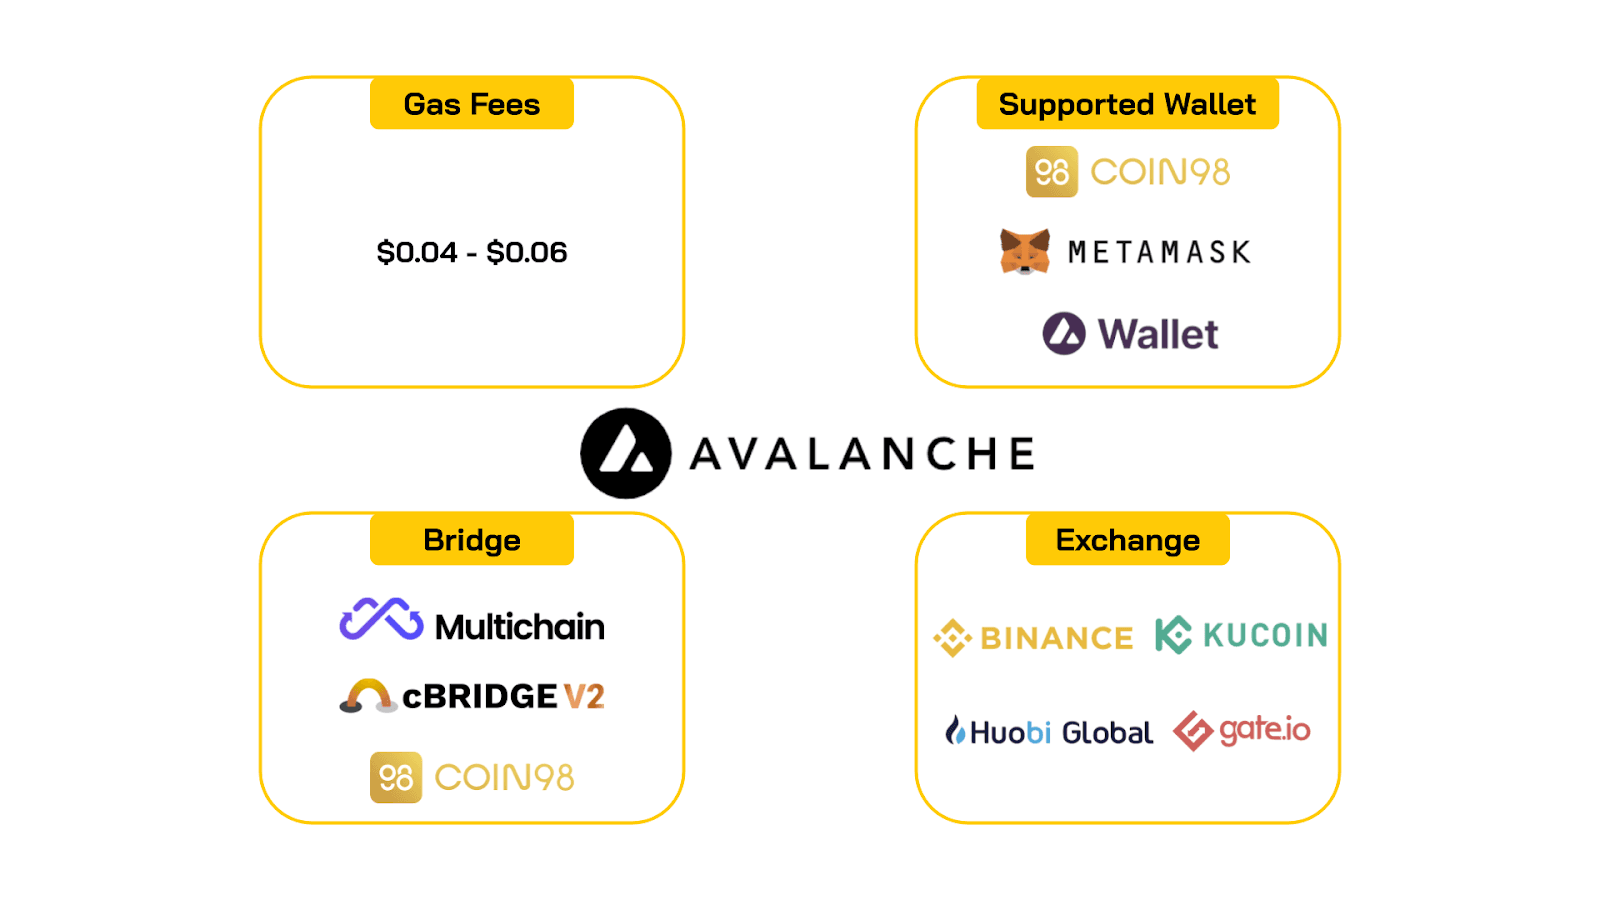 avalanche coin98 wallet